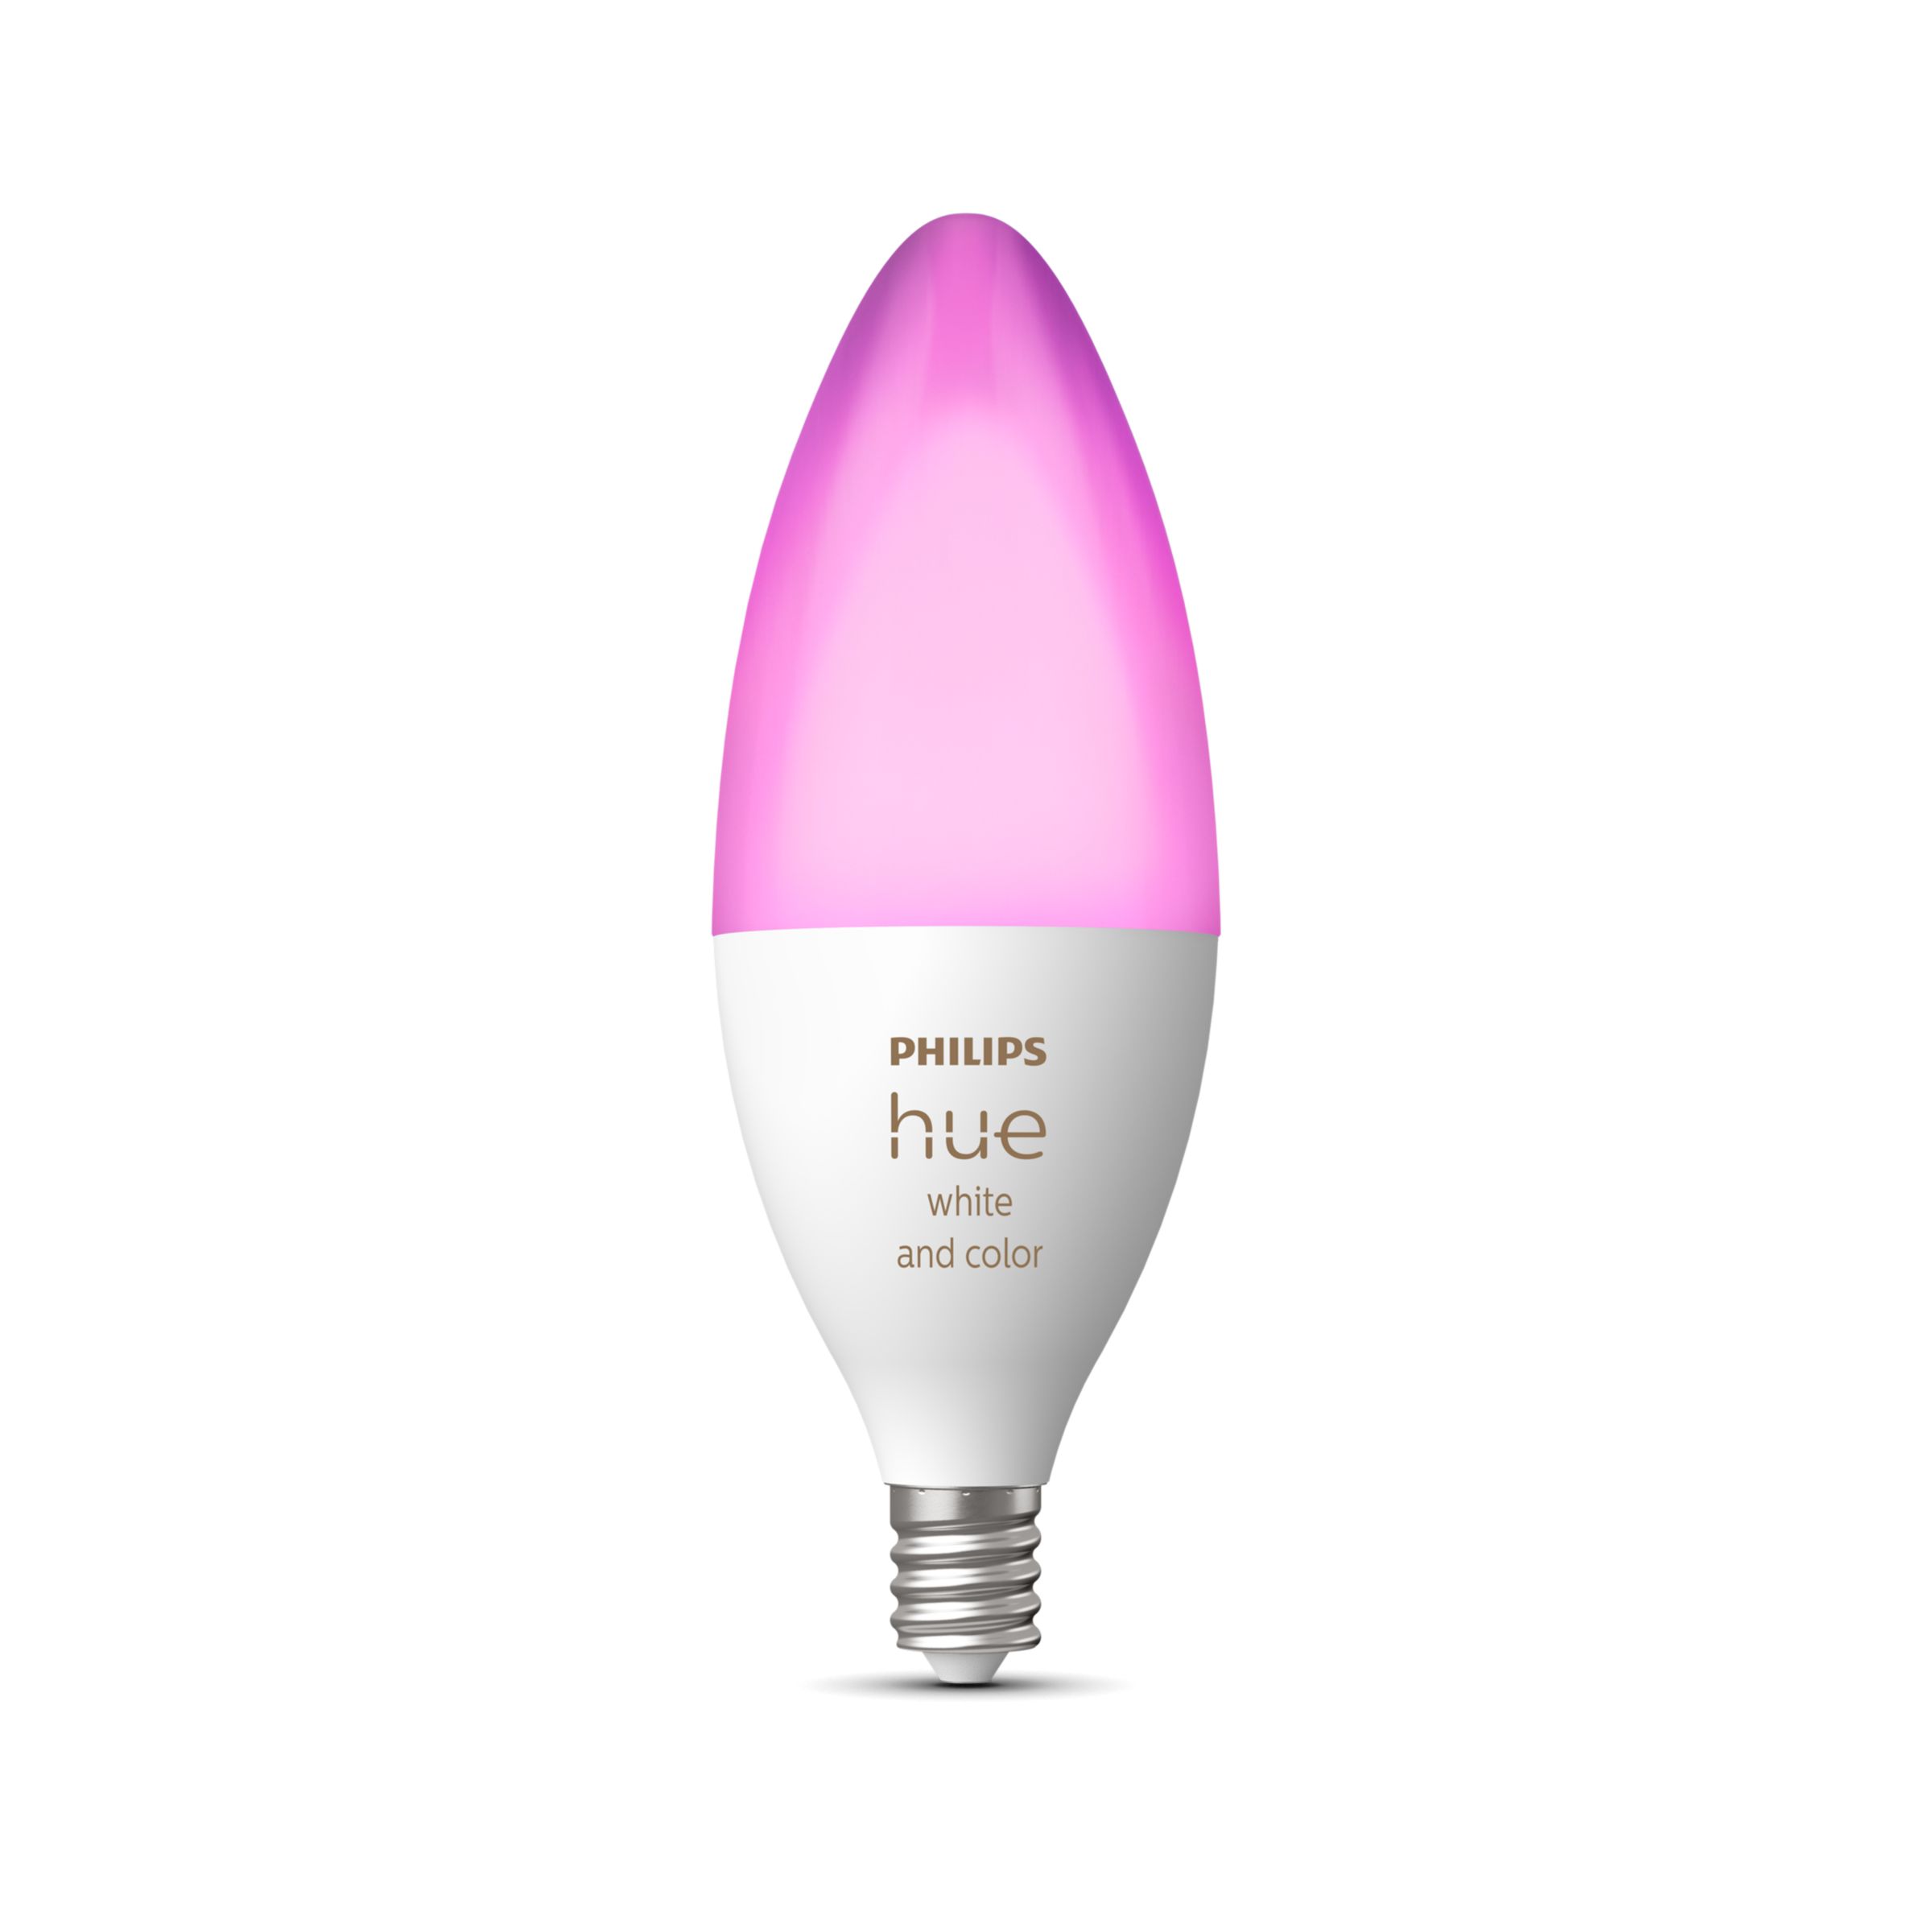 Philips Hue Smart 40W B39 Candle-Shaped LED Bulb - Soft Warm White Light -  2 Pack - 450LM - E12 - Indoor - Control with Hue App - Works with Alexa